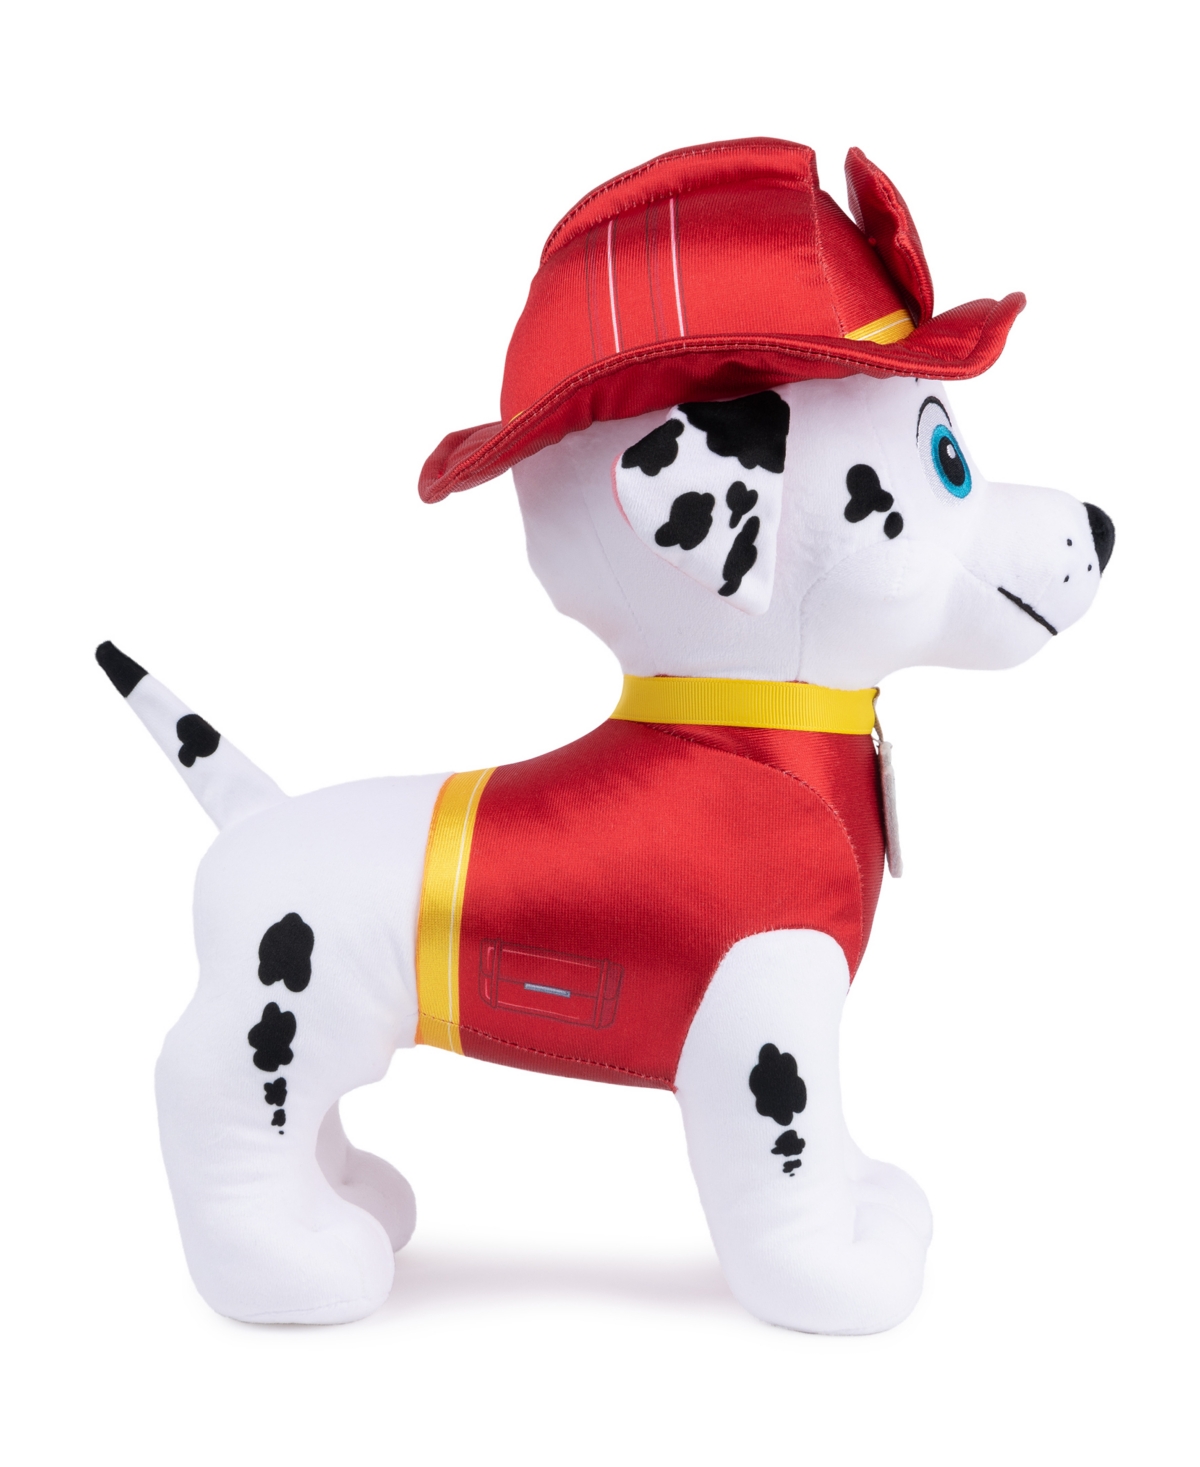 Shop Paw Patrol Marshall In Heroic Standing Position Premium Stuffed Animal Plush Toy In Multi-color